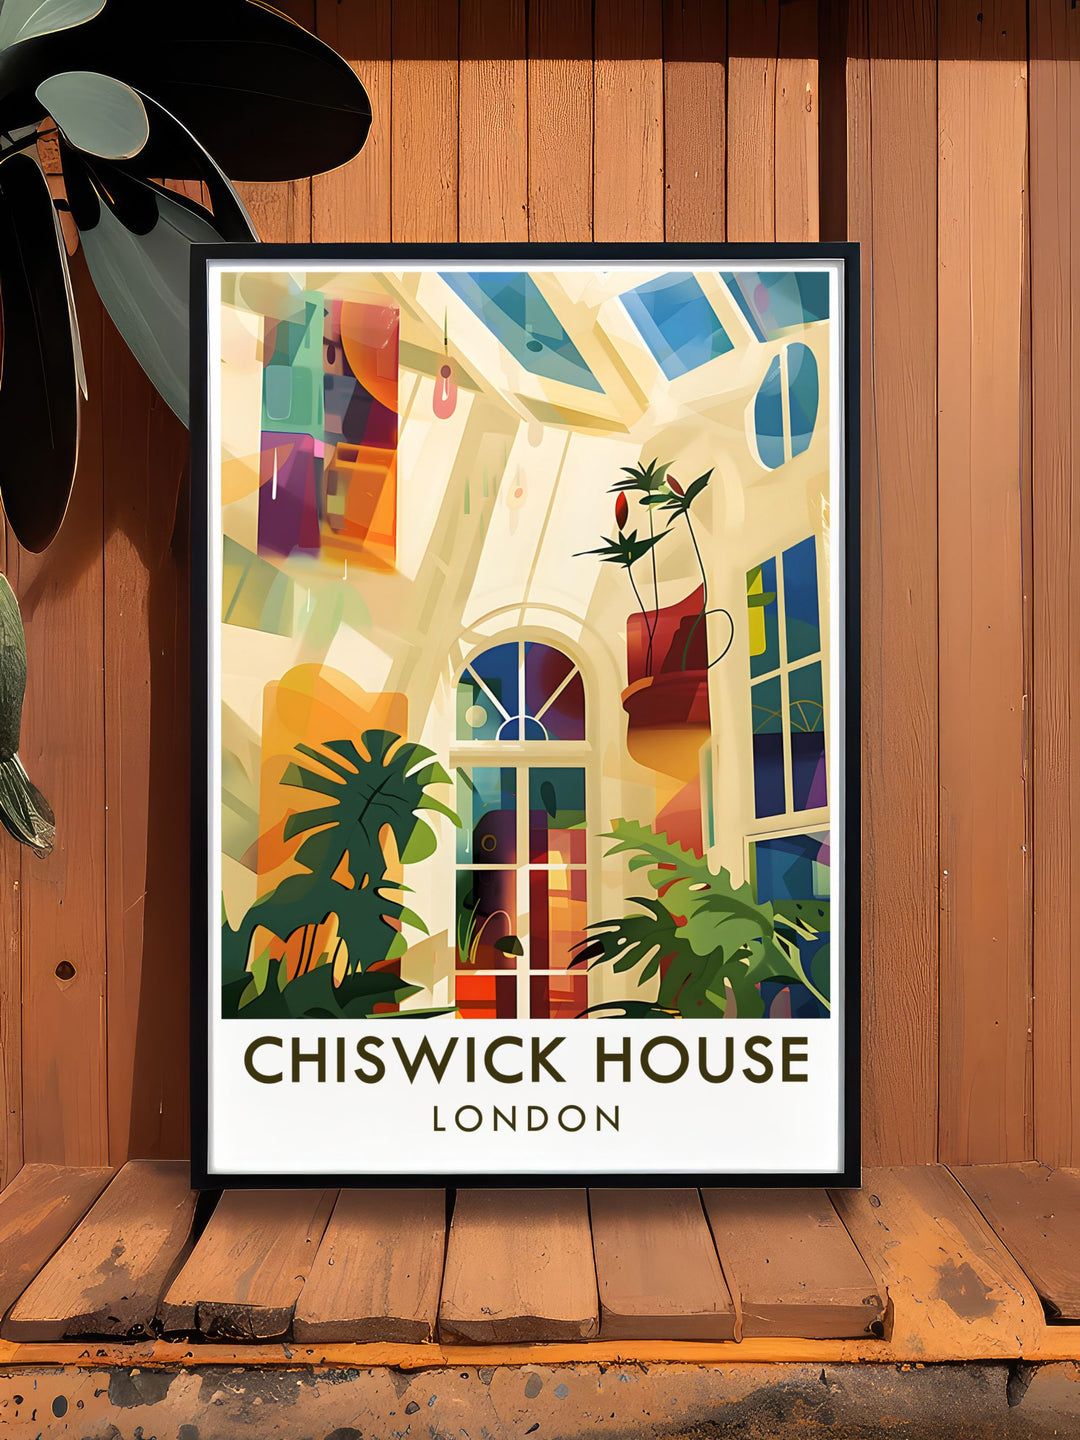 Witness the elegance of Chiswick Houses architectural design, with its grand central dome and ornate details that exemplify Palladian style.